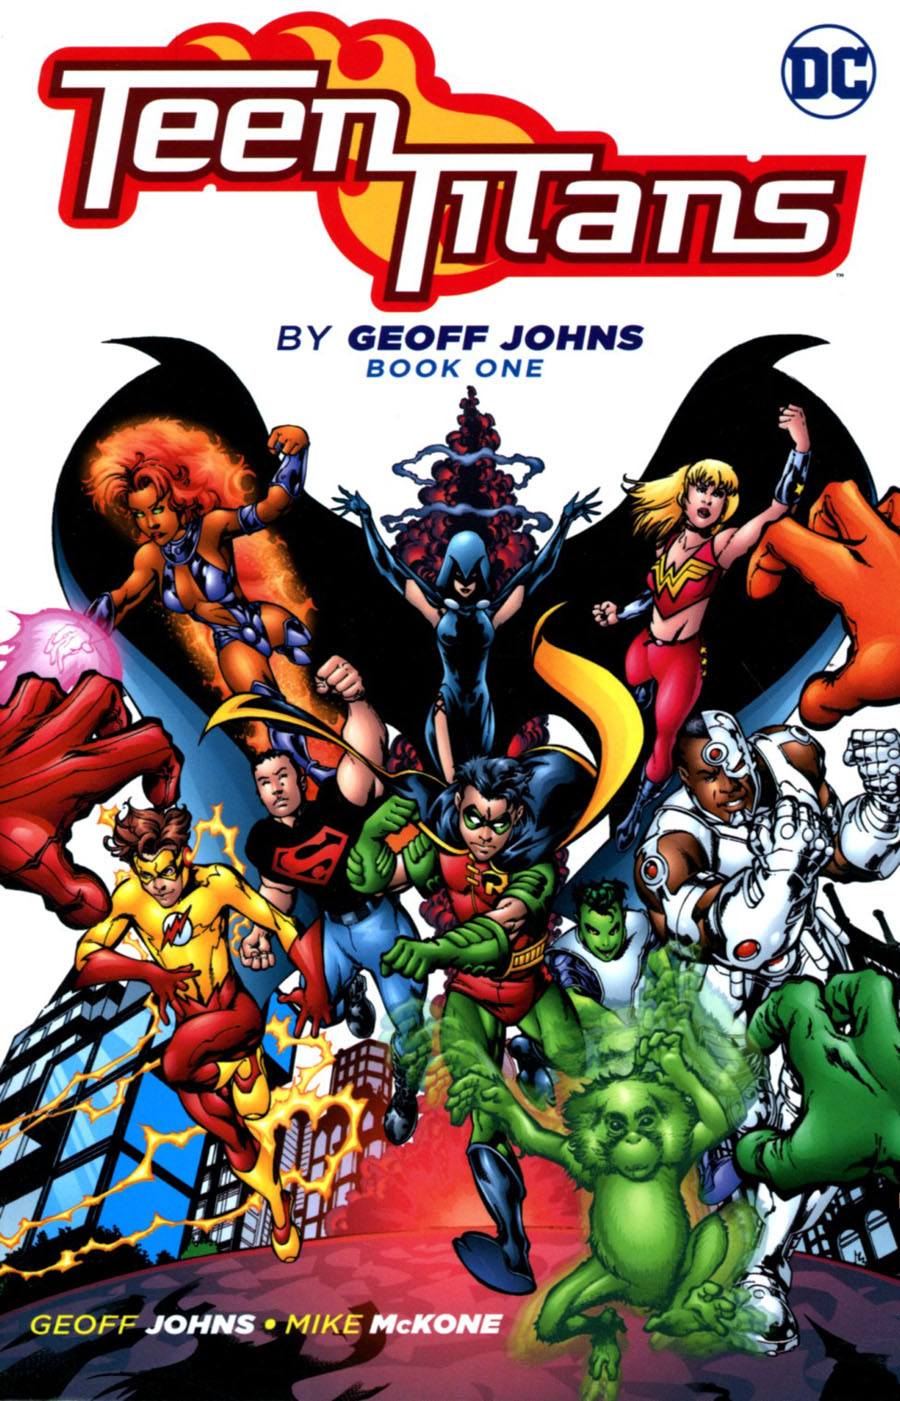 Teen Titans By Geoff Johns Book 1 TP